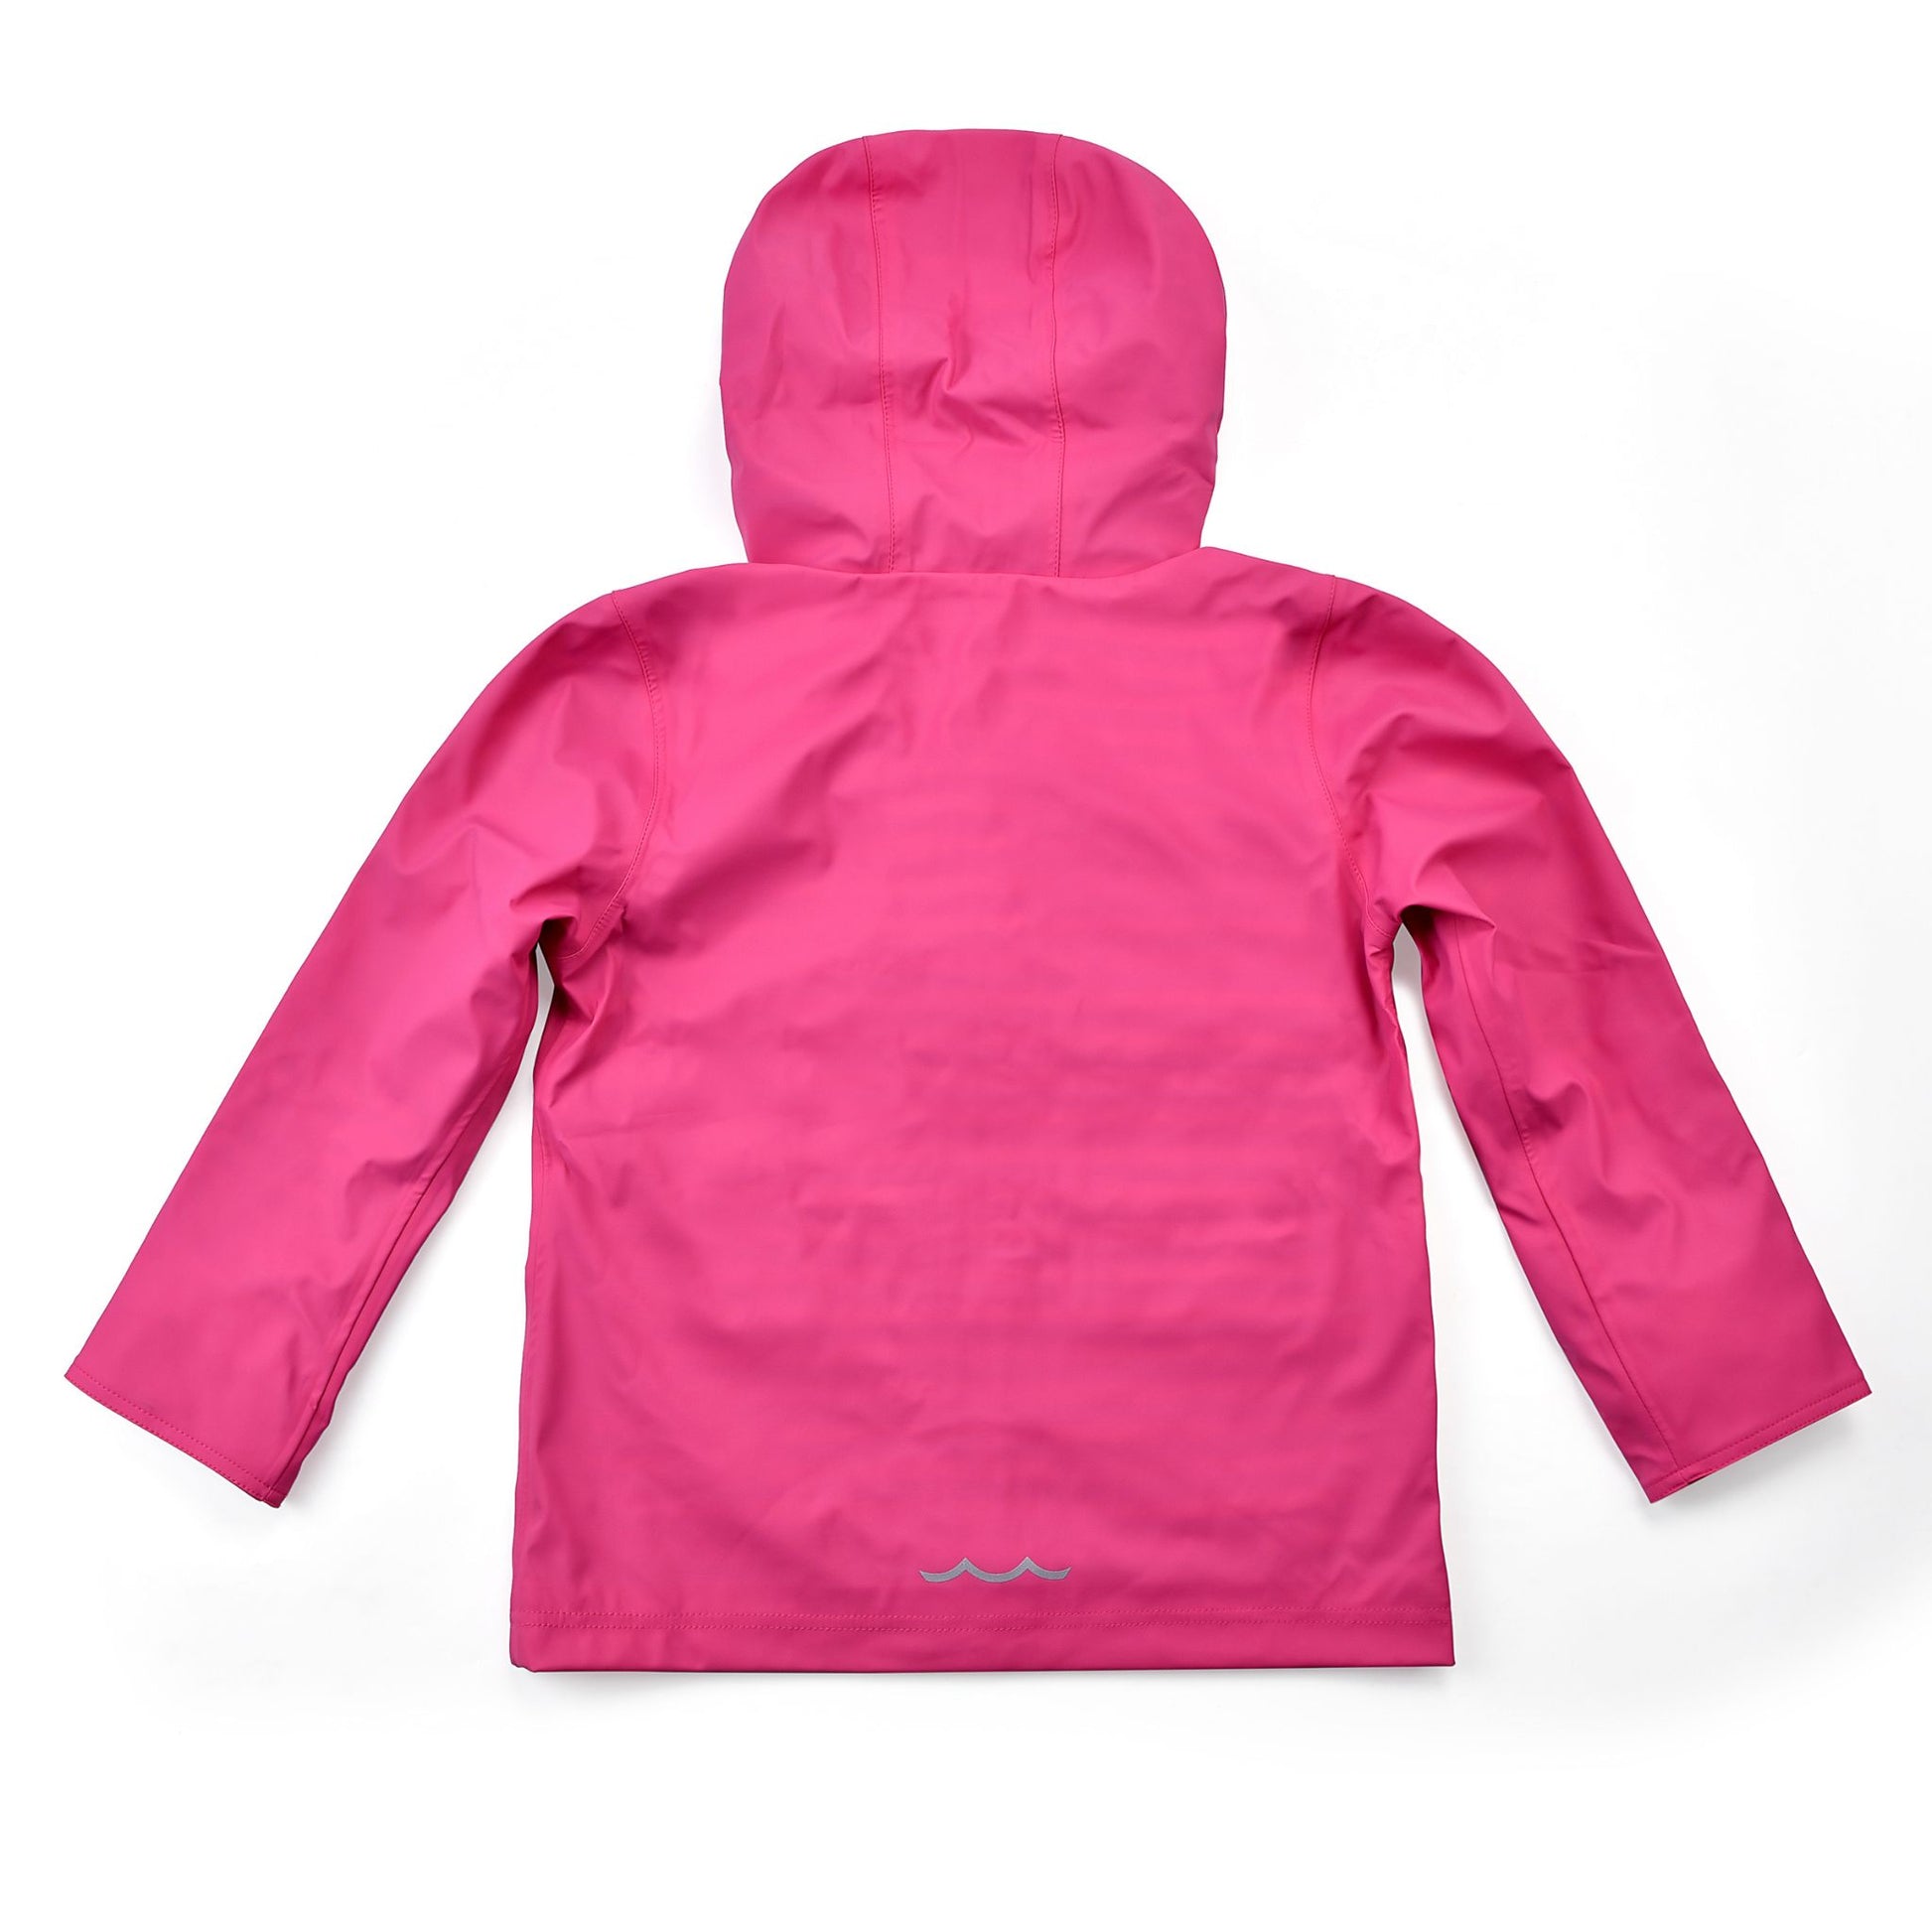 The back of a Pink Raincoat 